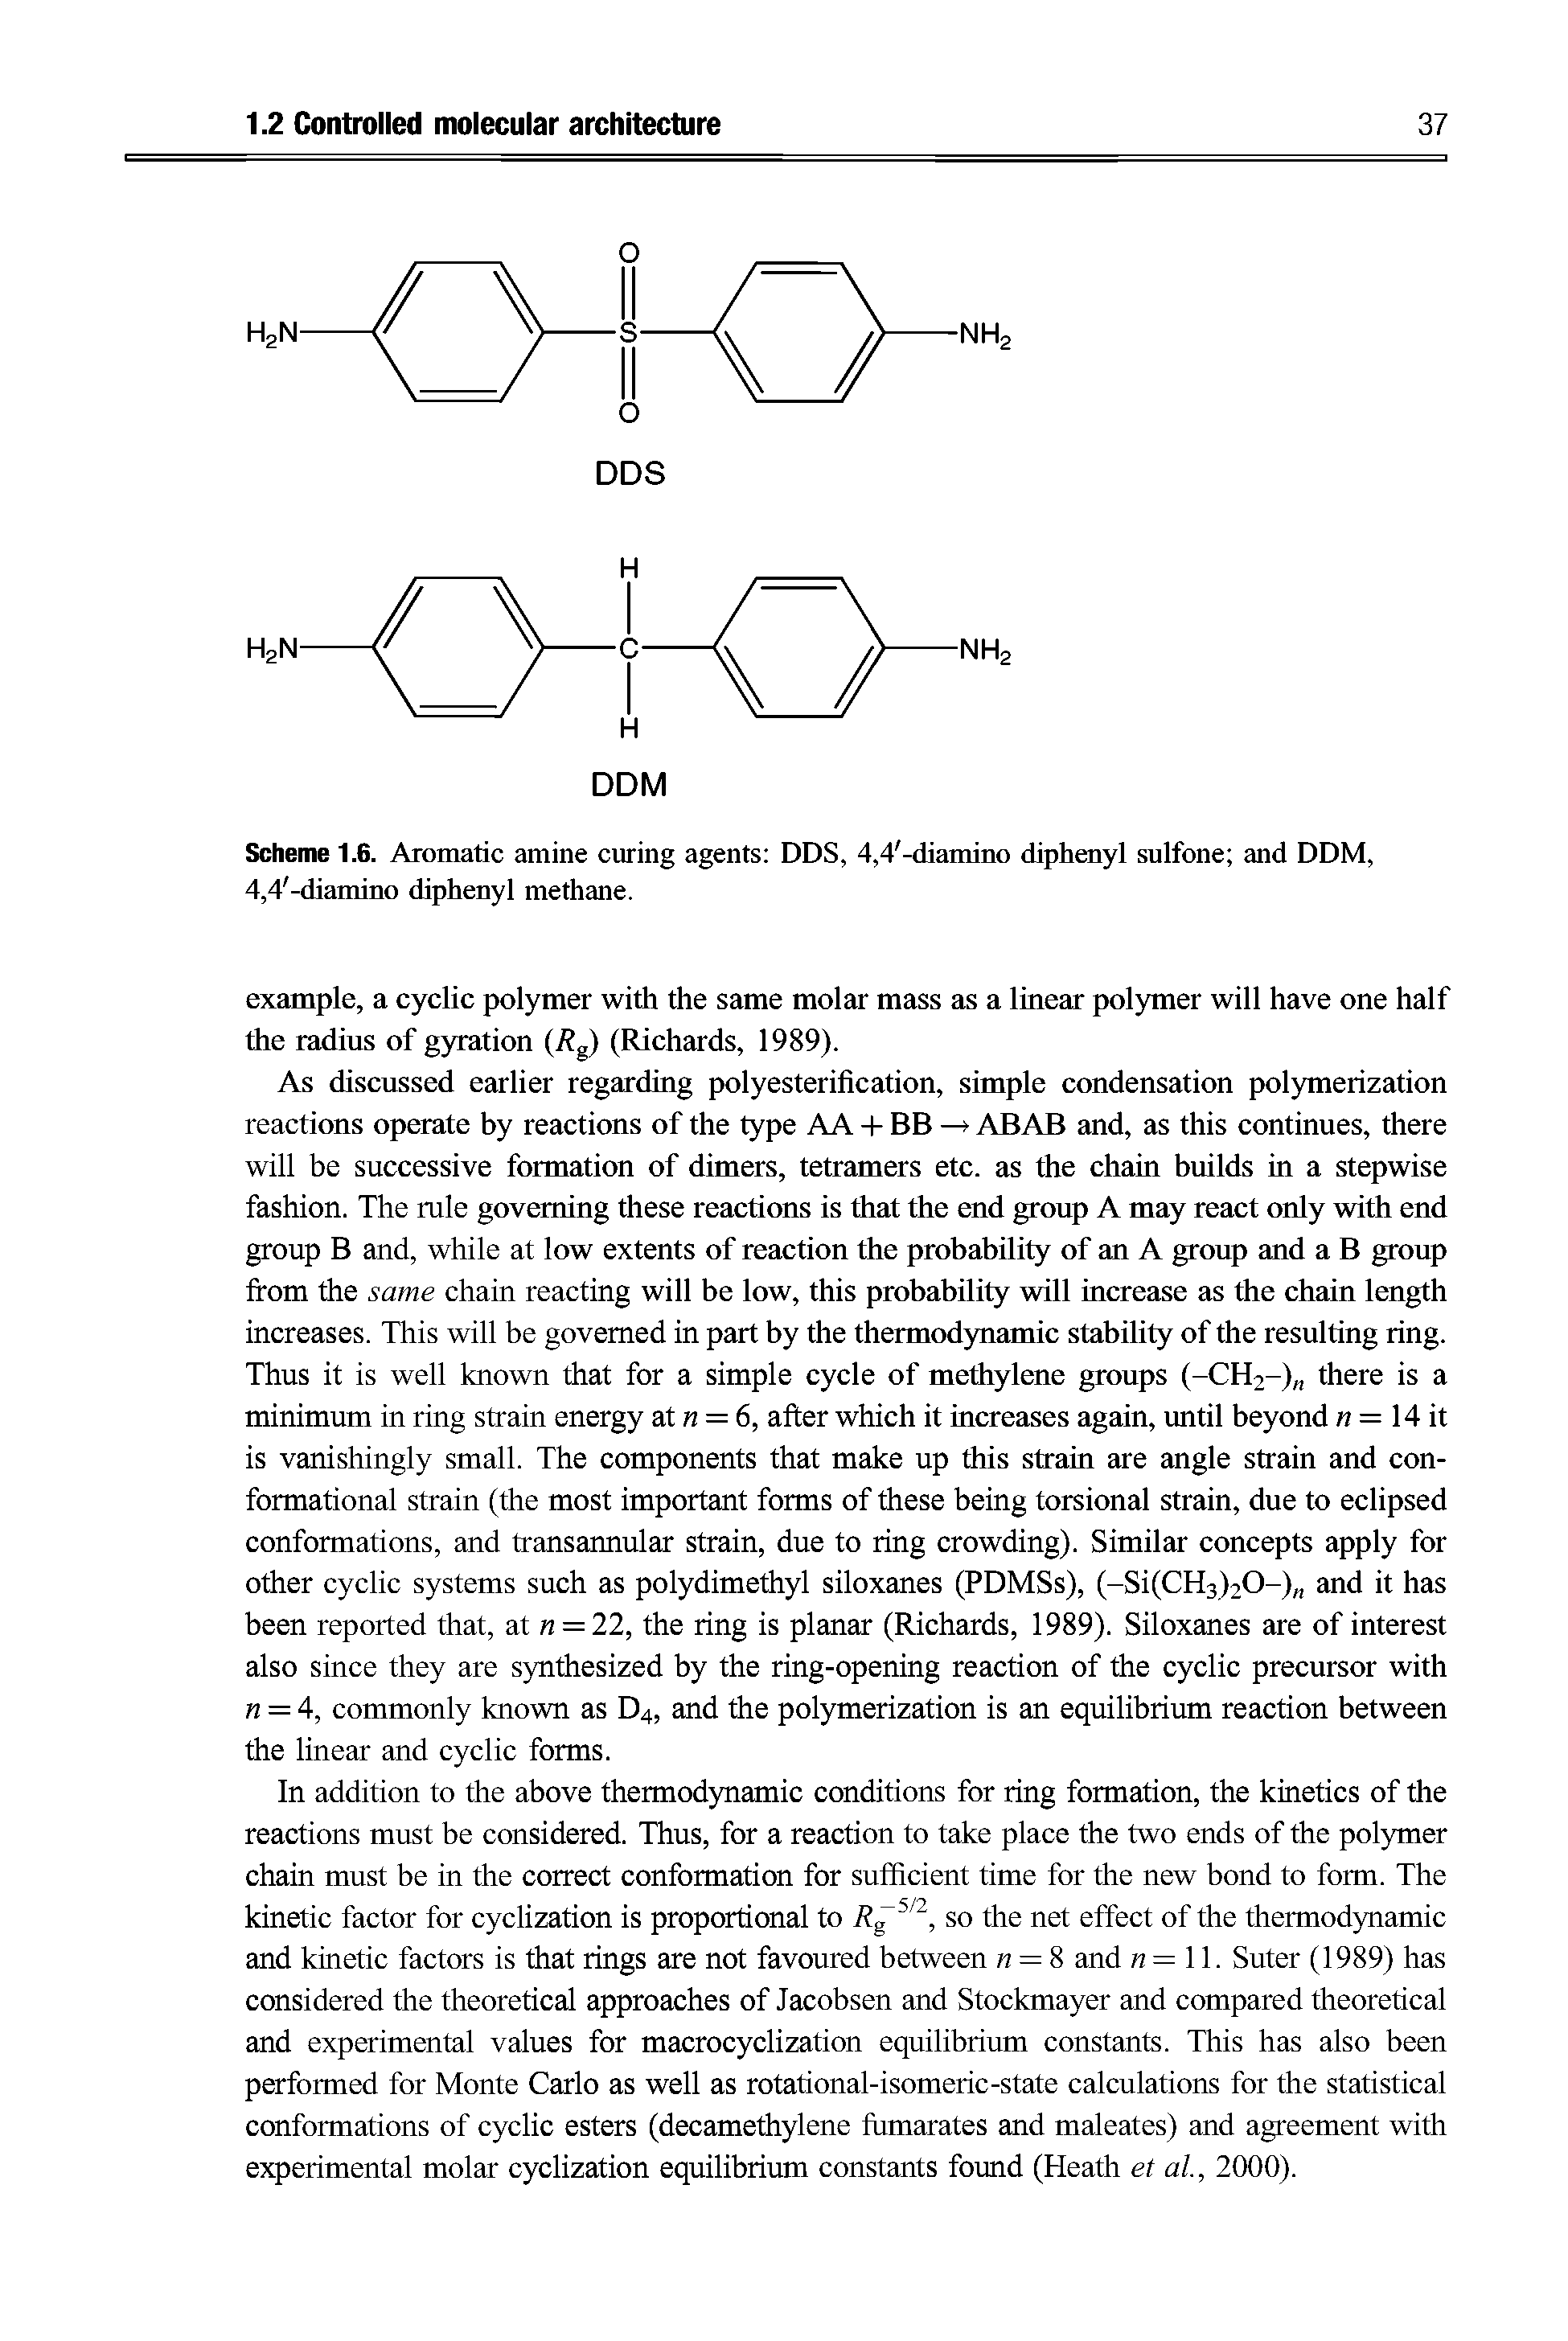 Scheme 1.6. Aromatic amine curing agents DDS, 4,4 -diamino diphenyl sulfone and DDM, 4,4 -diamino diphenyl methane.